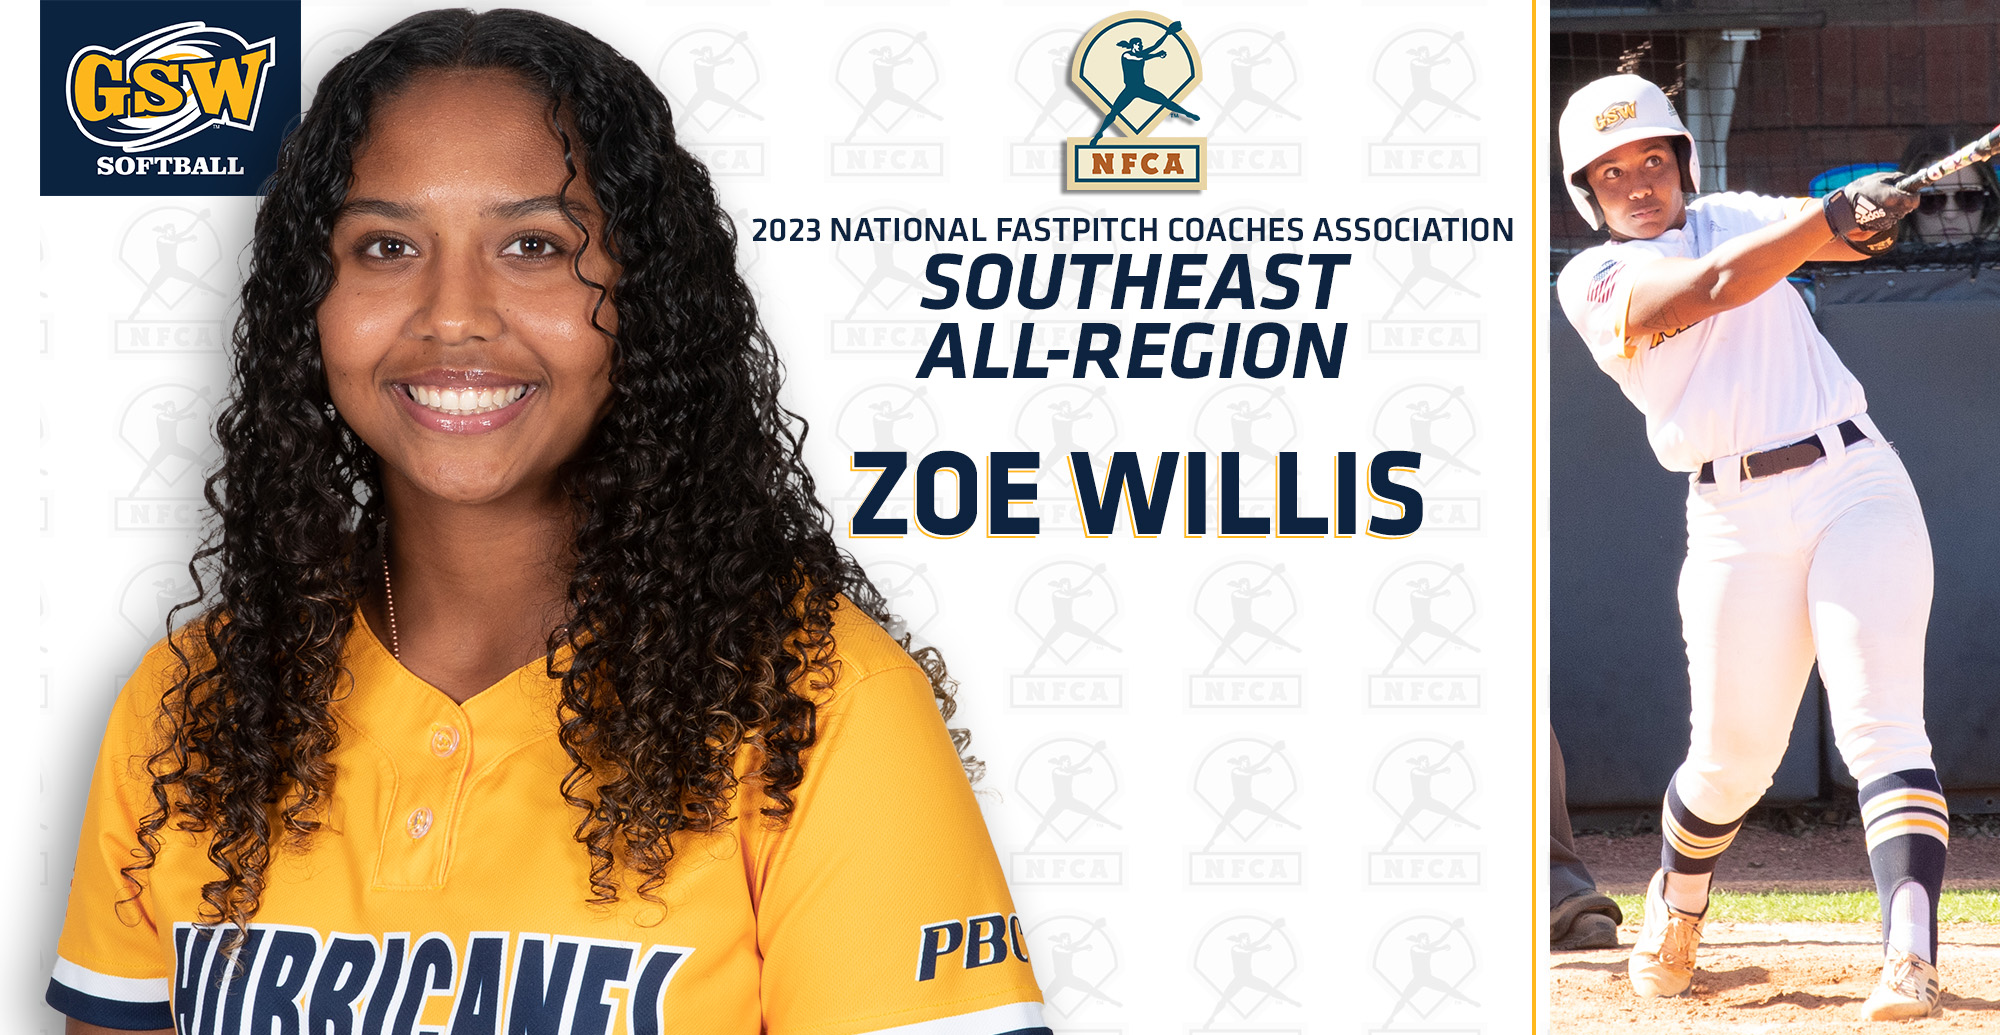 Willis Named Southeast All-Region First Team